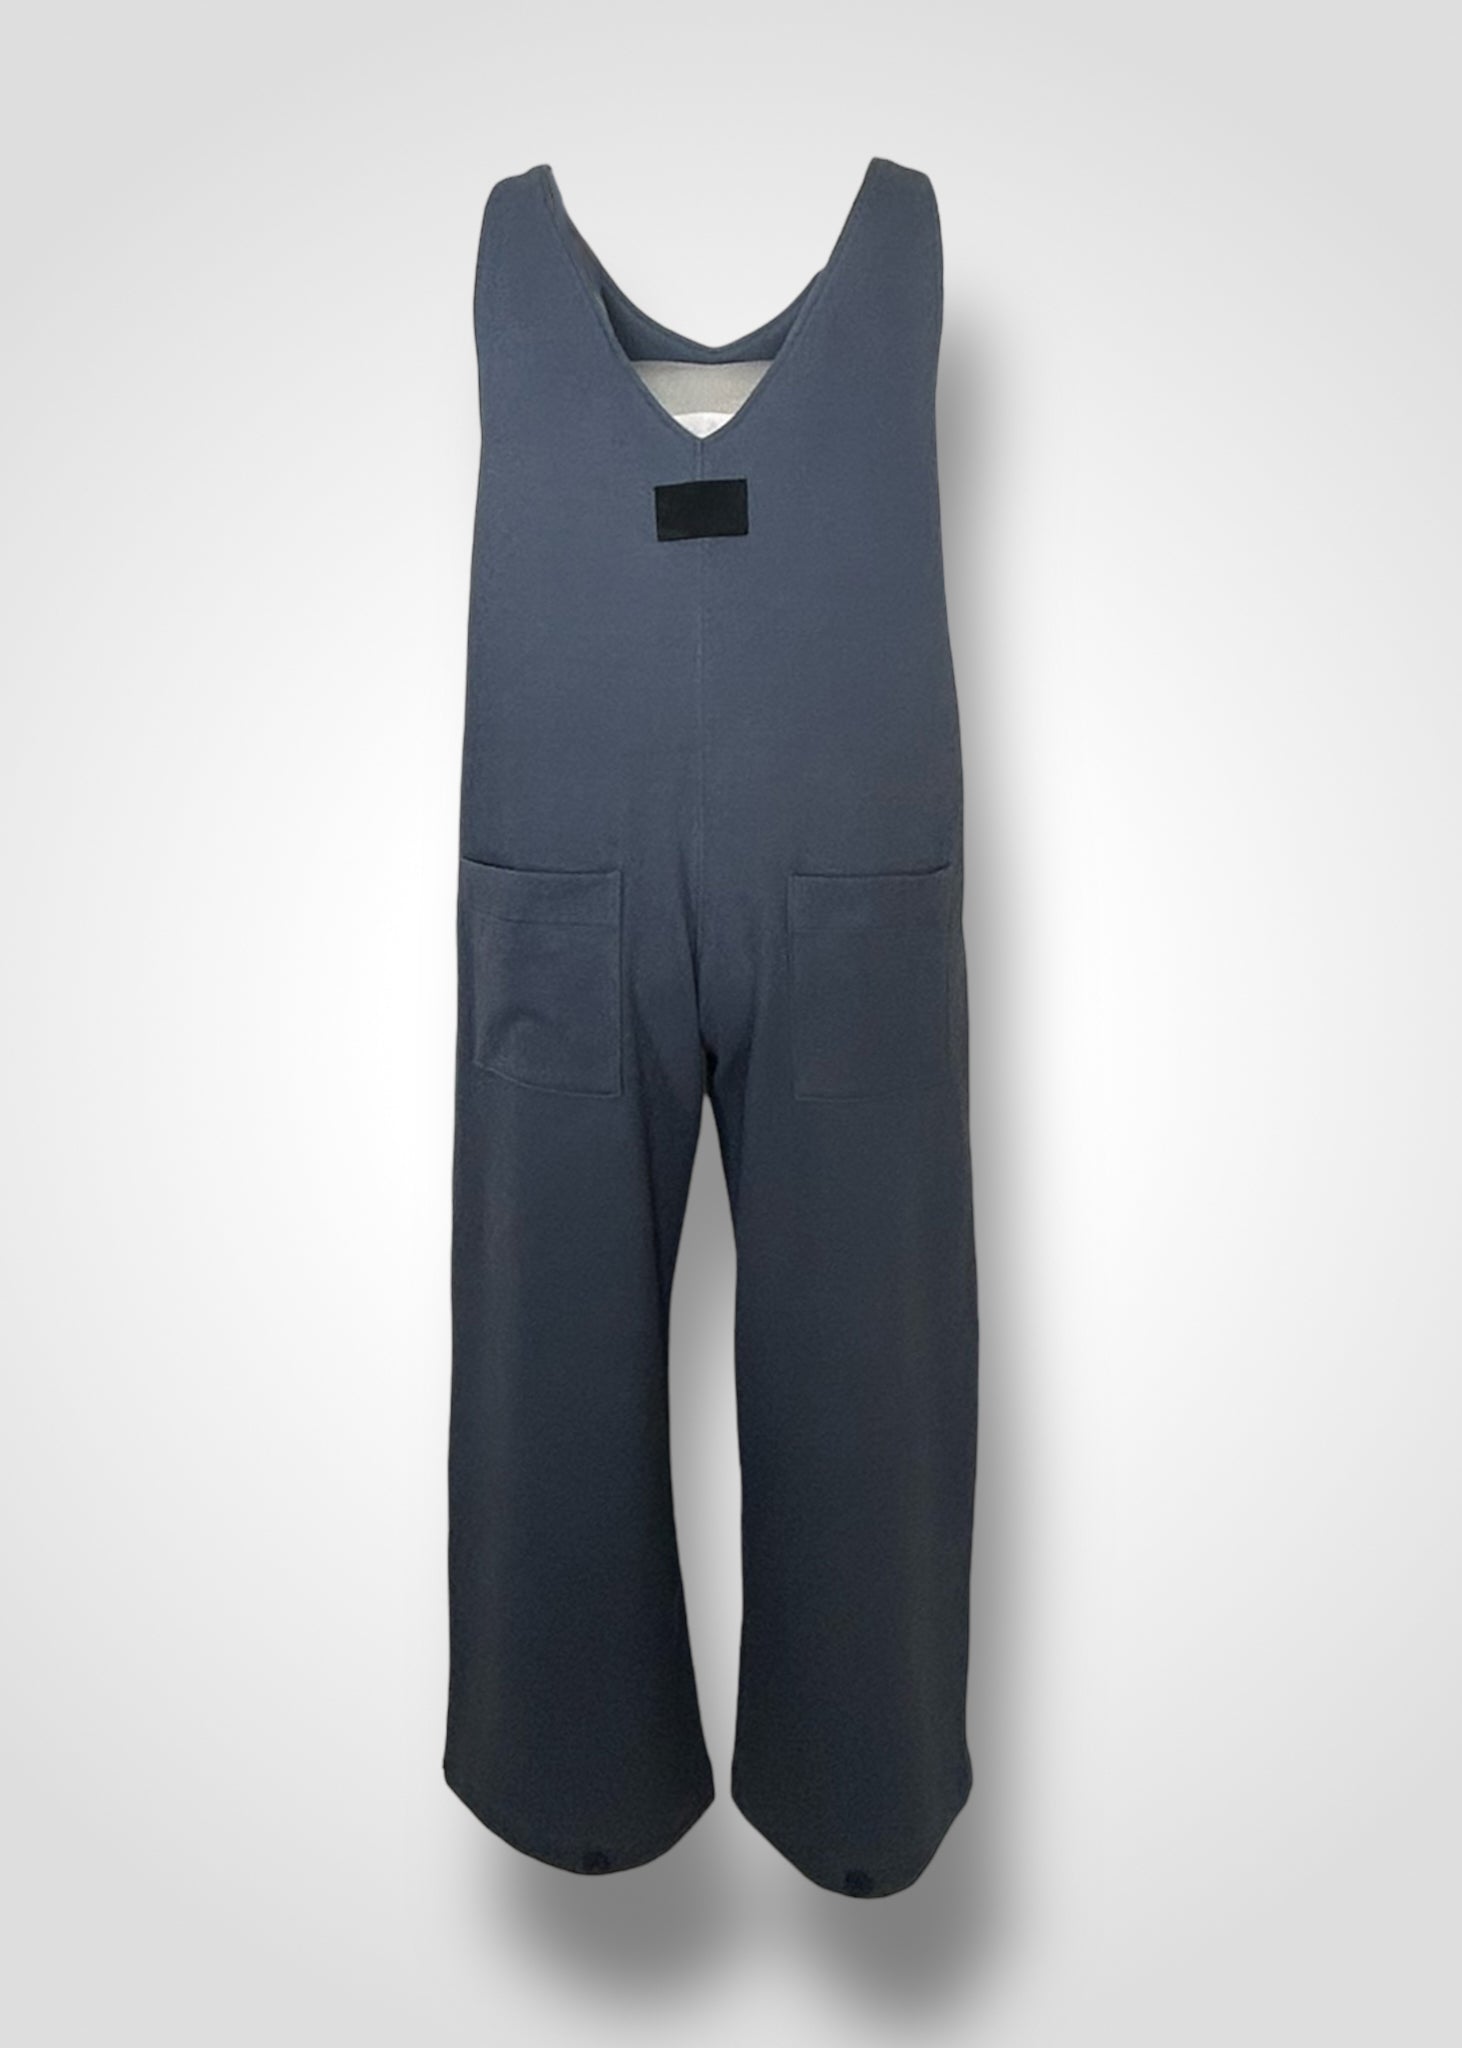 13 GRETEL OVERALLS / STRETCH DOUBLE JERSEY - C10